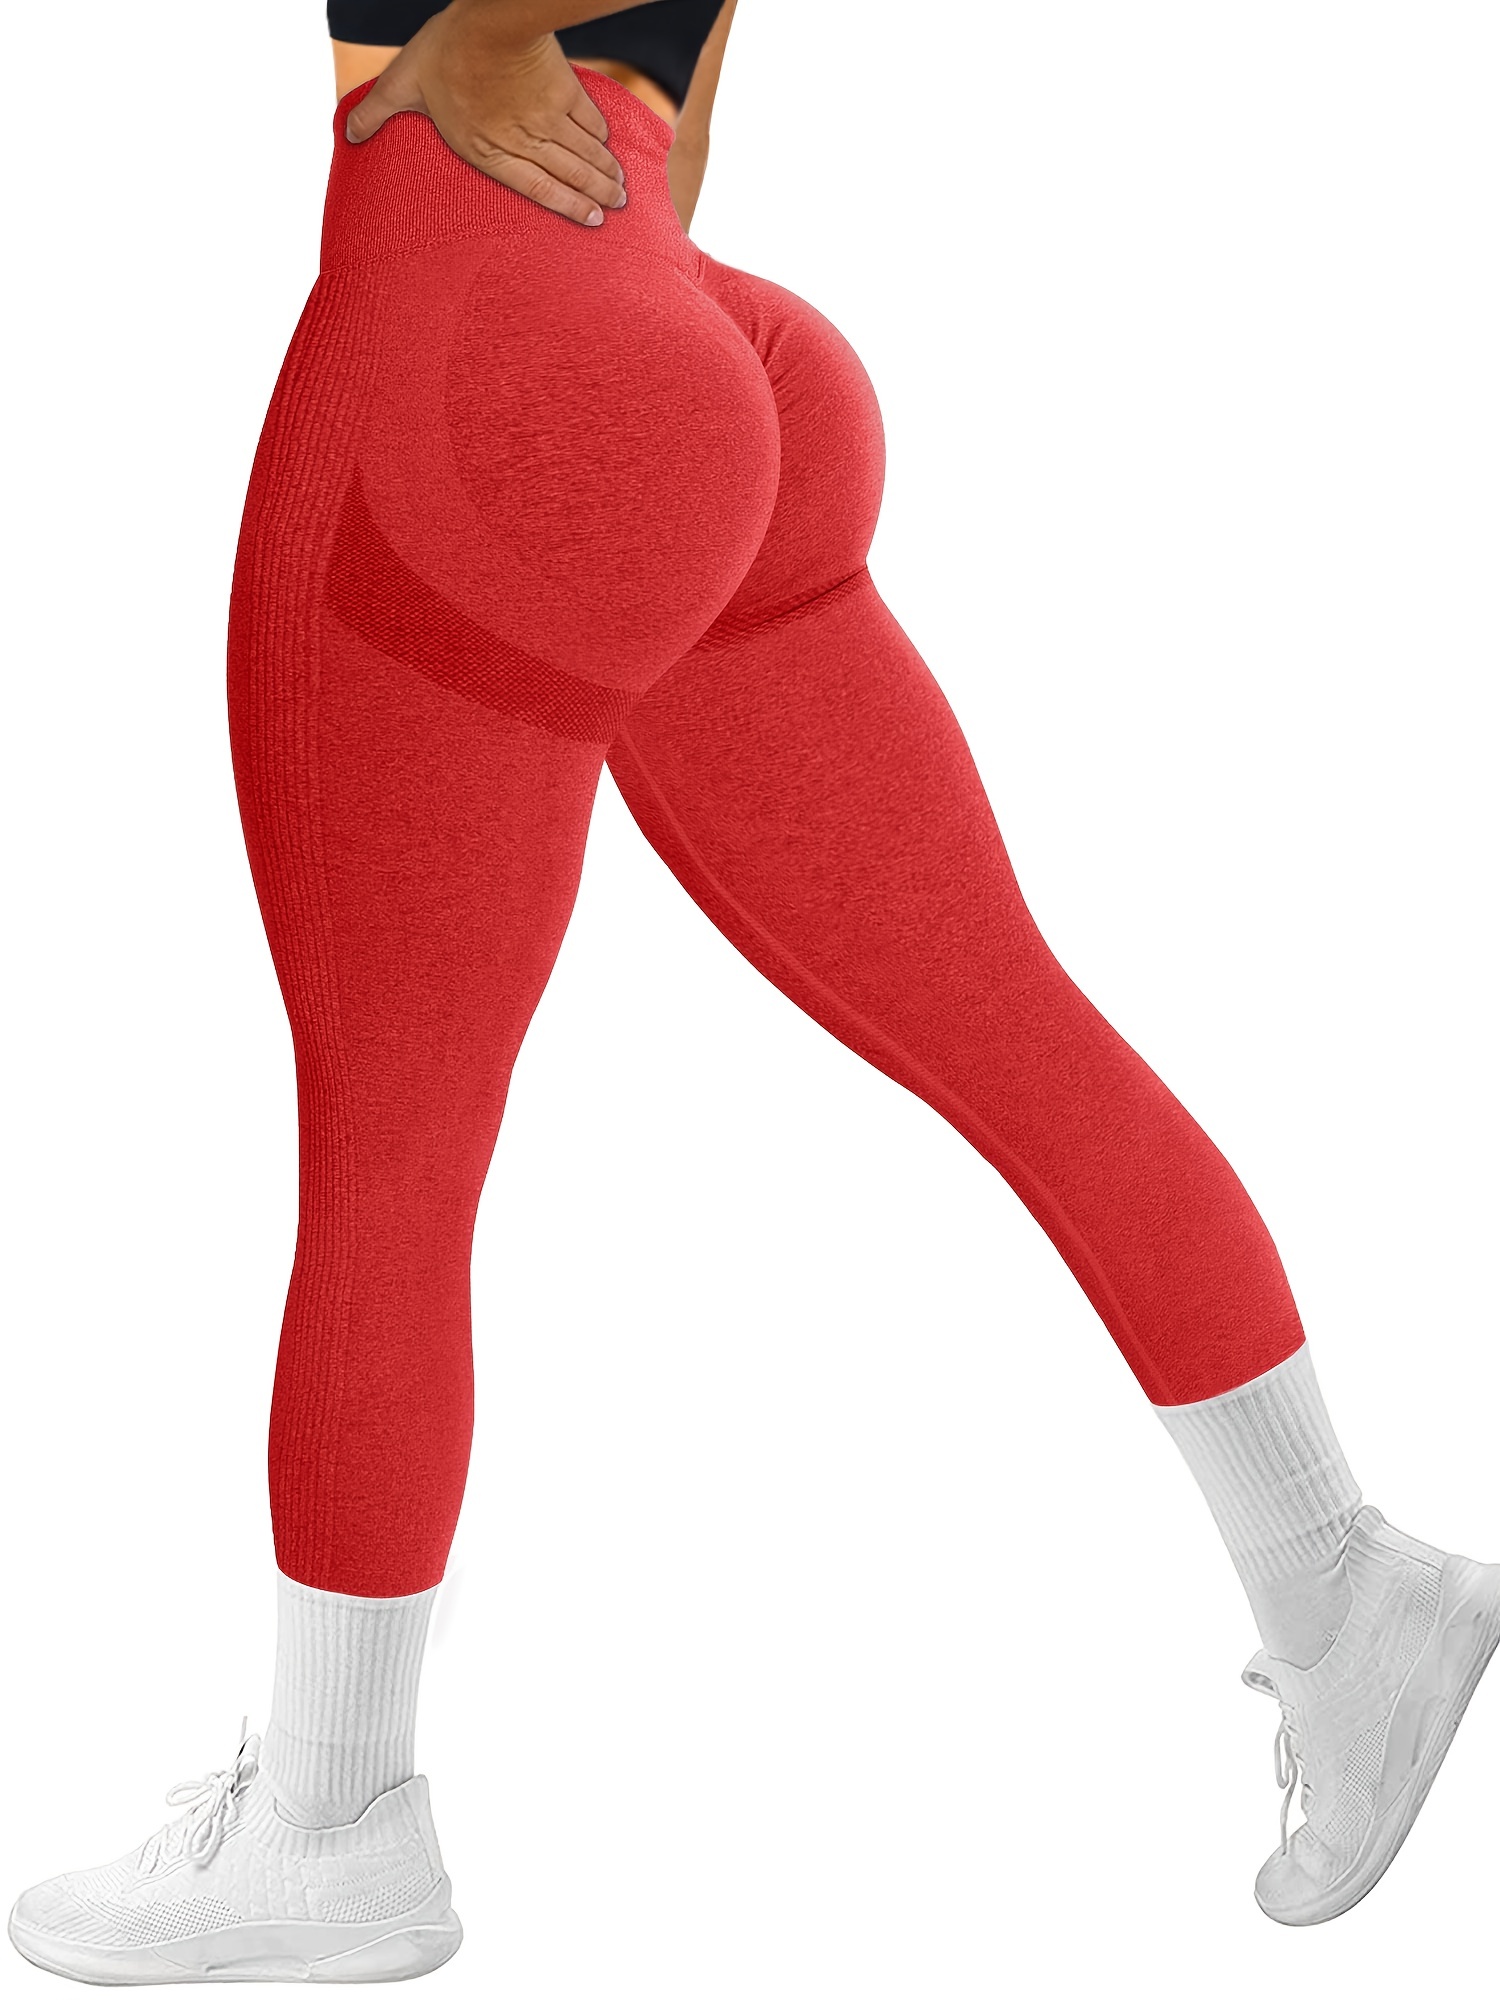 Women's Yoga Leggings with Butt Seamless Booty Tight for Wife